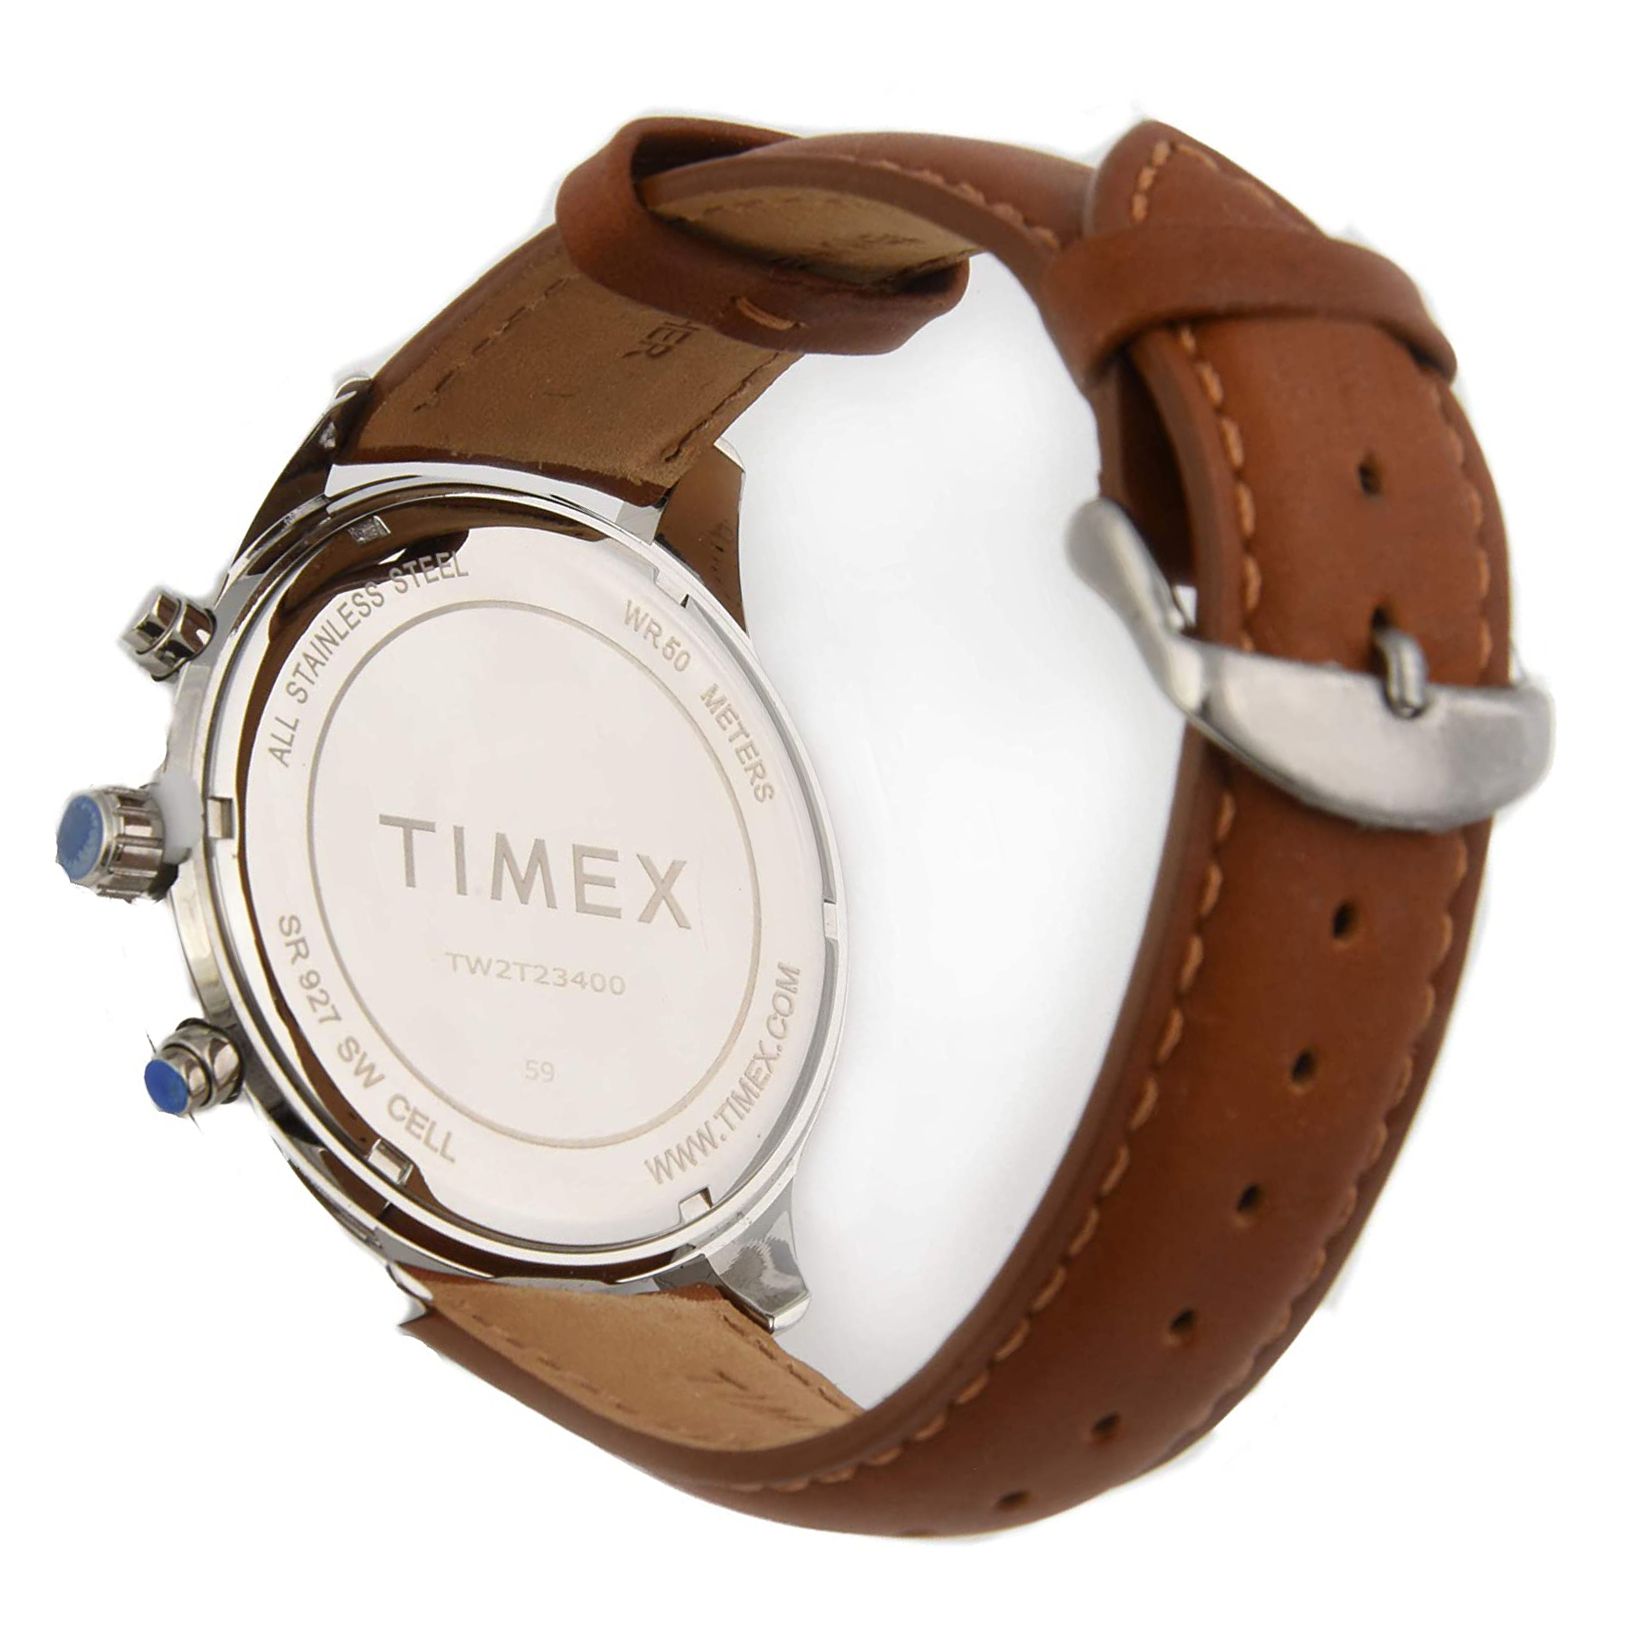 This Timex  Multi Dial Watch for Men is the perfect timepiece to wear or to gift. It's Silver 46 mm Round case combined with the comfortable Brown Leather watch band will ensure you enjoy this stunning timepiece without any compromise. Operated by a high quality Quartz movement and water resistant to 5 bars, your watch will keep ticking. The classic colours will go great with any outfit . It enables you to easily spice up a normal outfit and add style to your life. -The watch has a calendar function: Day-Date, 24-hour Display, Luminous Hands, Tachymeter High quality 21 cm length and 21 mm width Brown Leather strap with a Buckle Case diameter: 46 mm,case thickness: 13 mm, case colour: Silver and dial colour: Multicolour